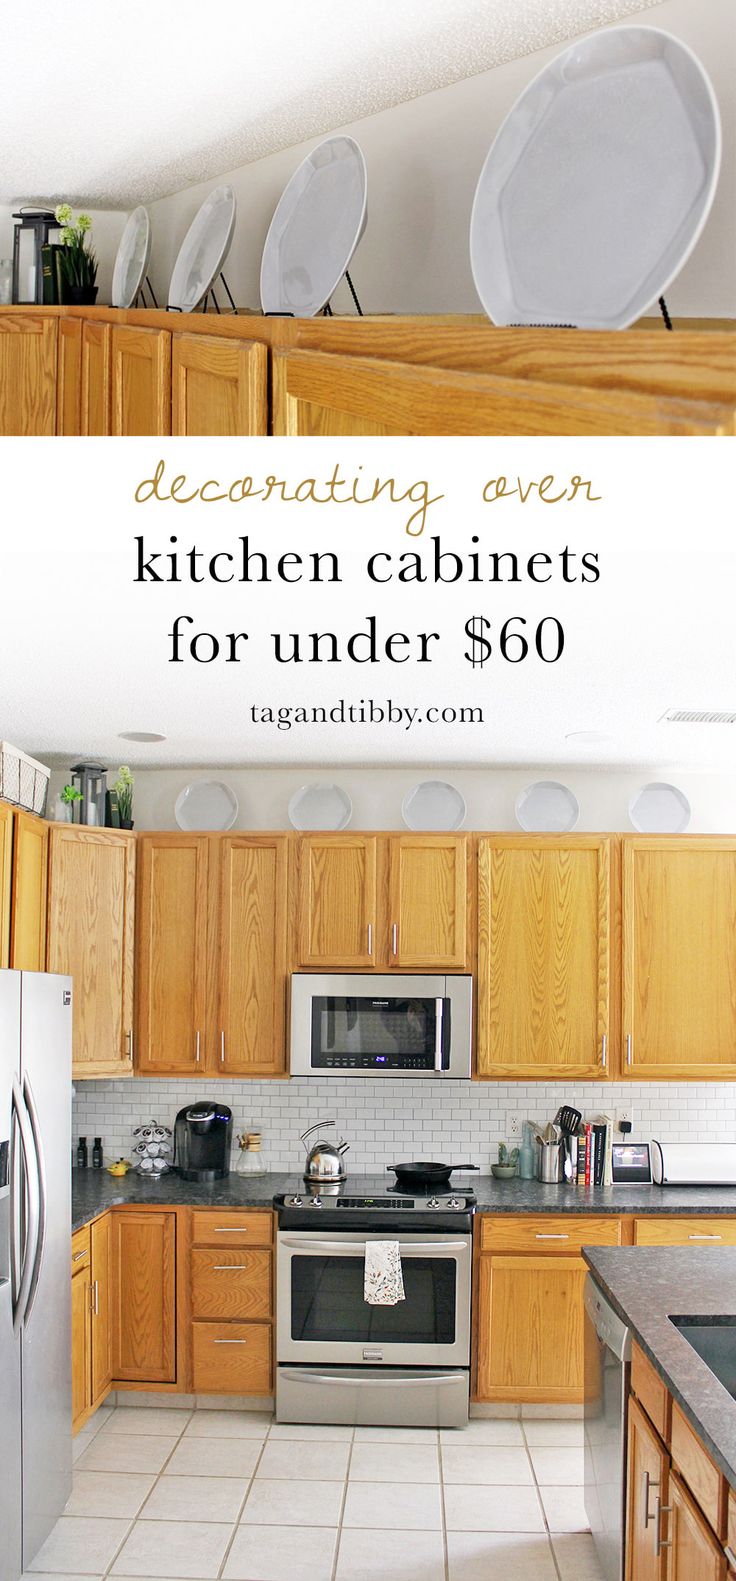 Decorating Over Kitchen Cabinets for Under $60